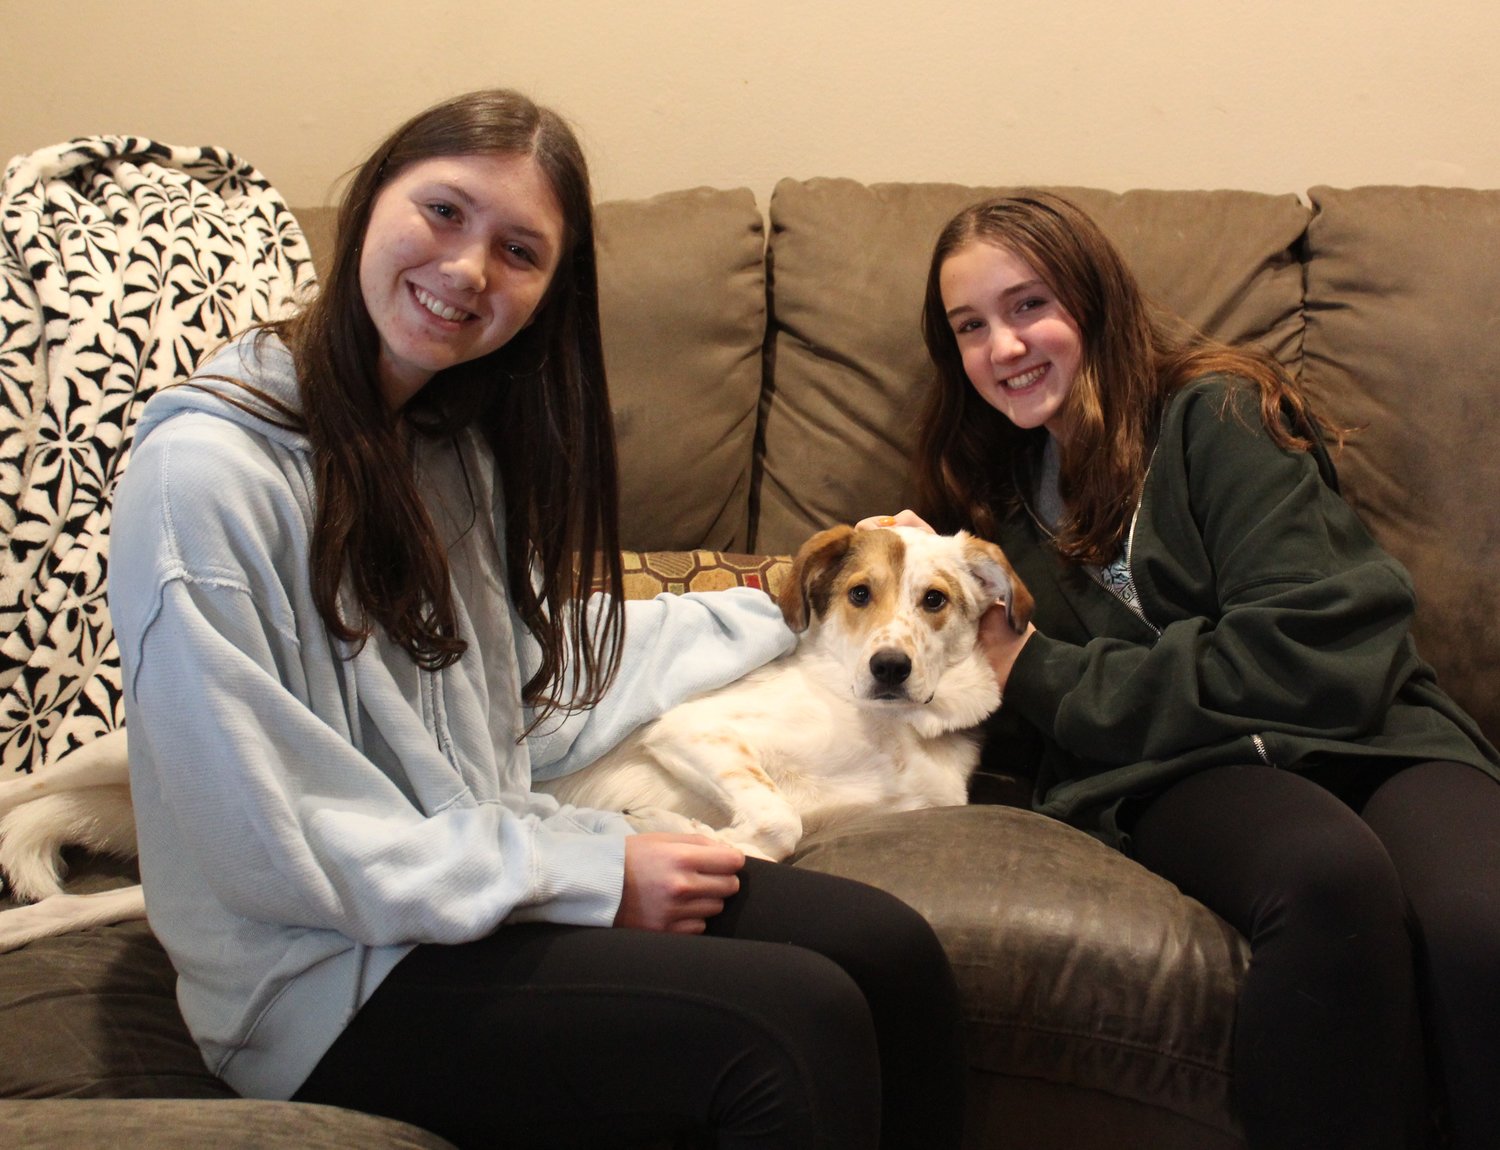 Paws for a Cause founders Sydney Dolger and Riley Rugolo sit with Dolger’s dog Rari, in middle, who helped inspire giving back to Posh Pets animal shelter in Long Beach.